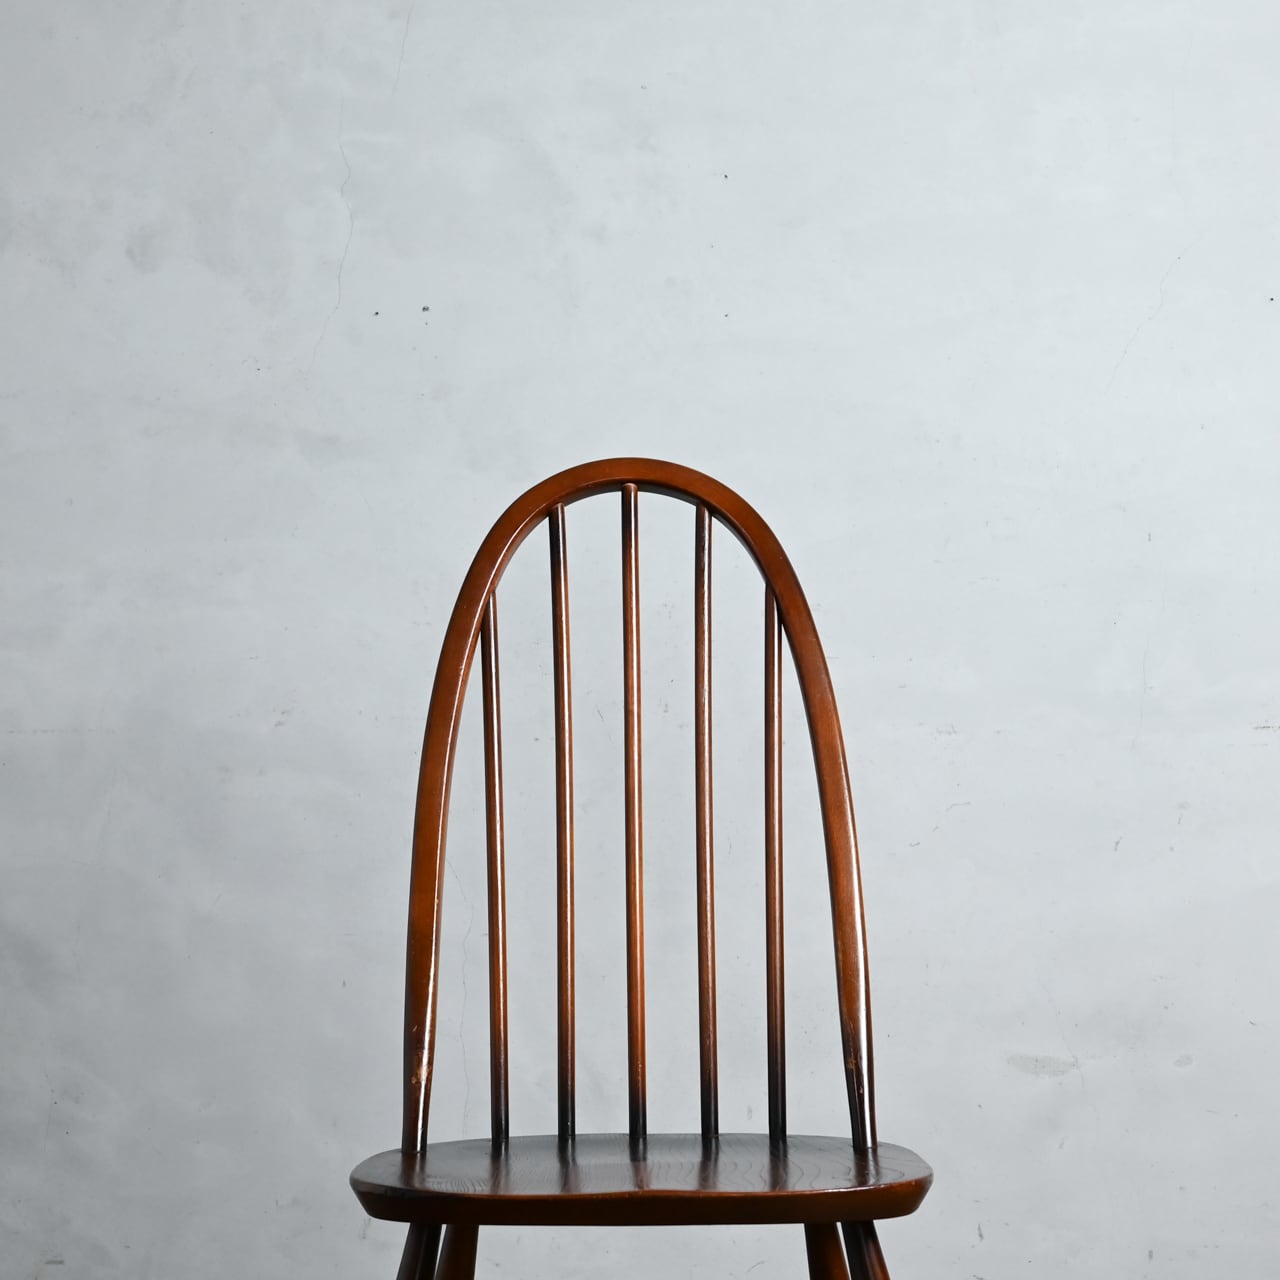 Ercol Quaker Chair / アーコール クエーカー チェア 〈ダイニング